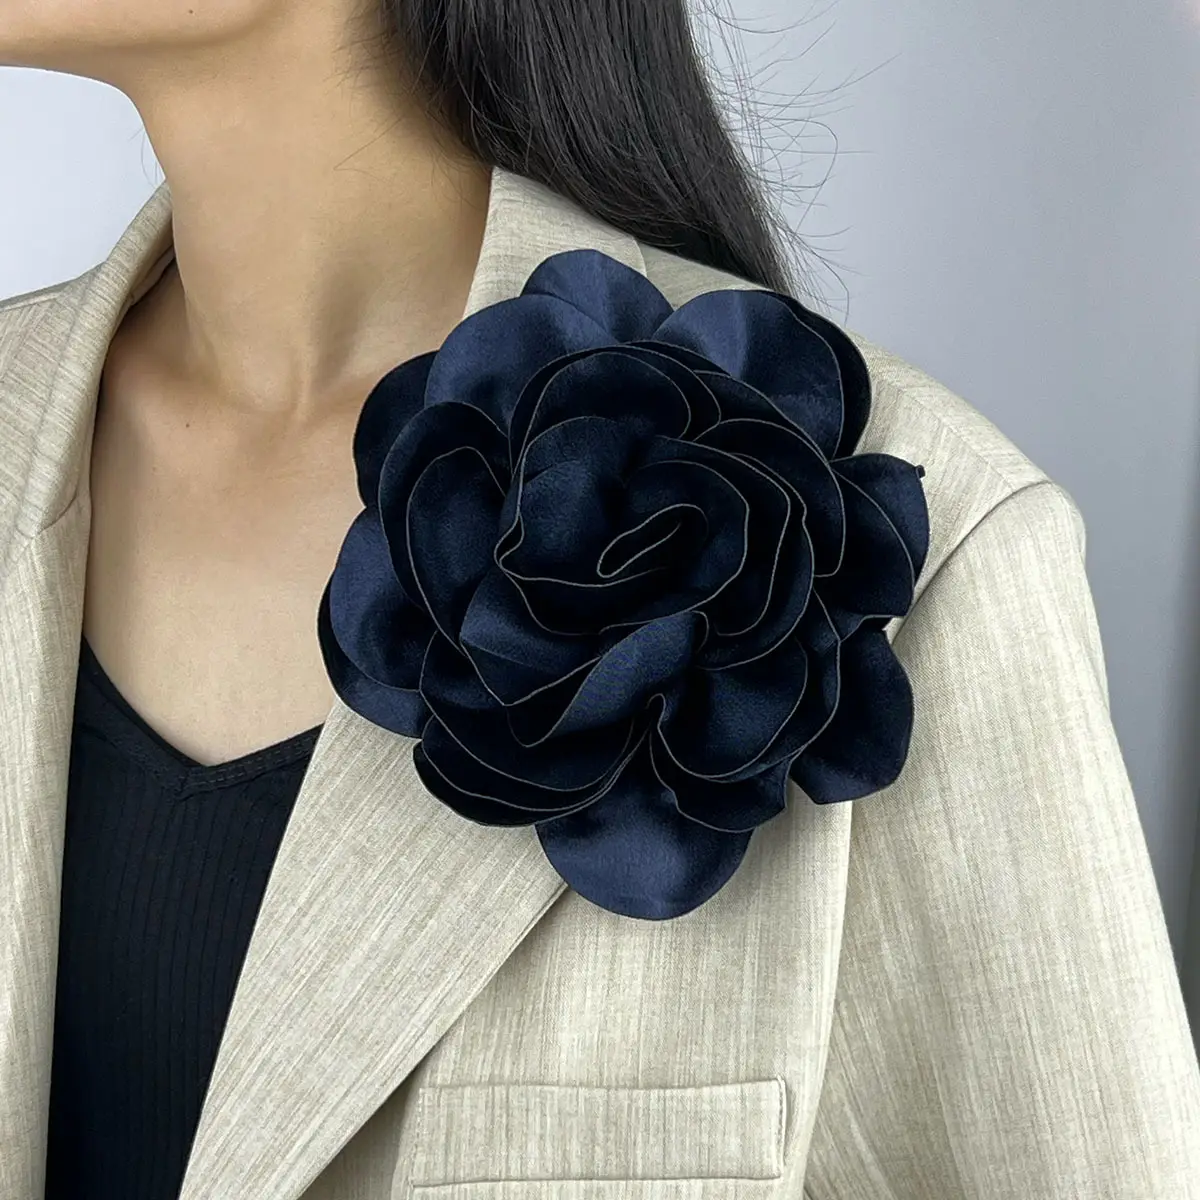 Customized 19CM large satin camellia brooch Fashion elegant clothing accessories handmade fabric flower brooches for women Girl